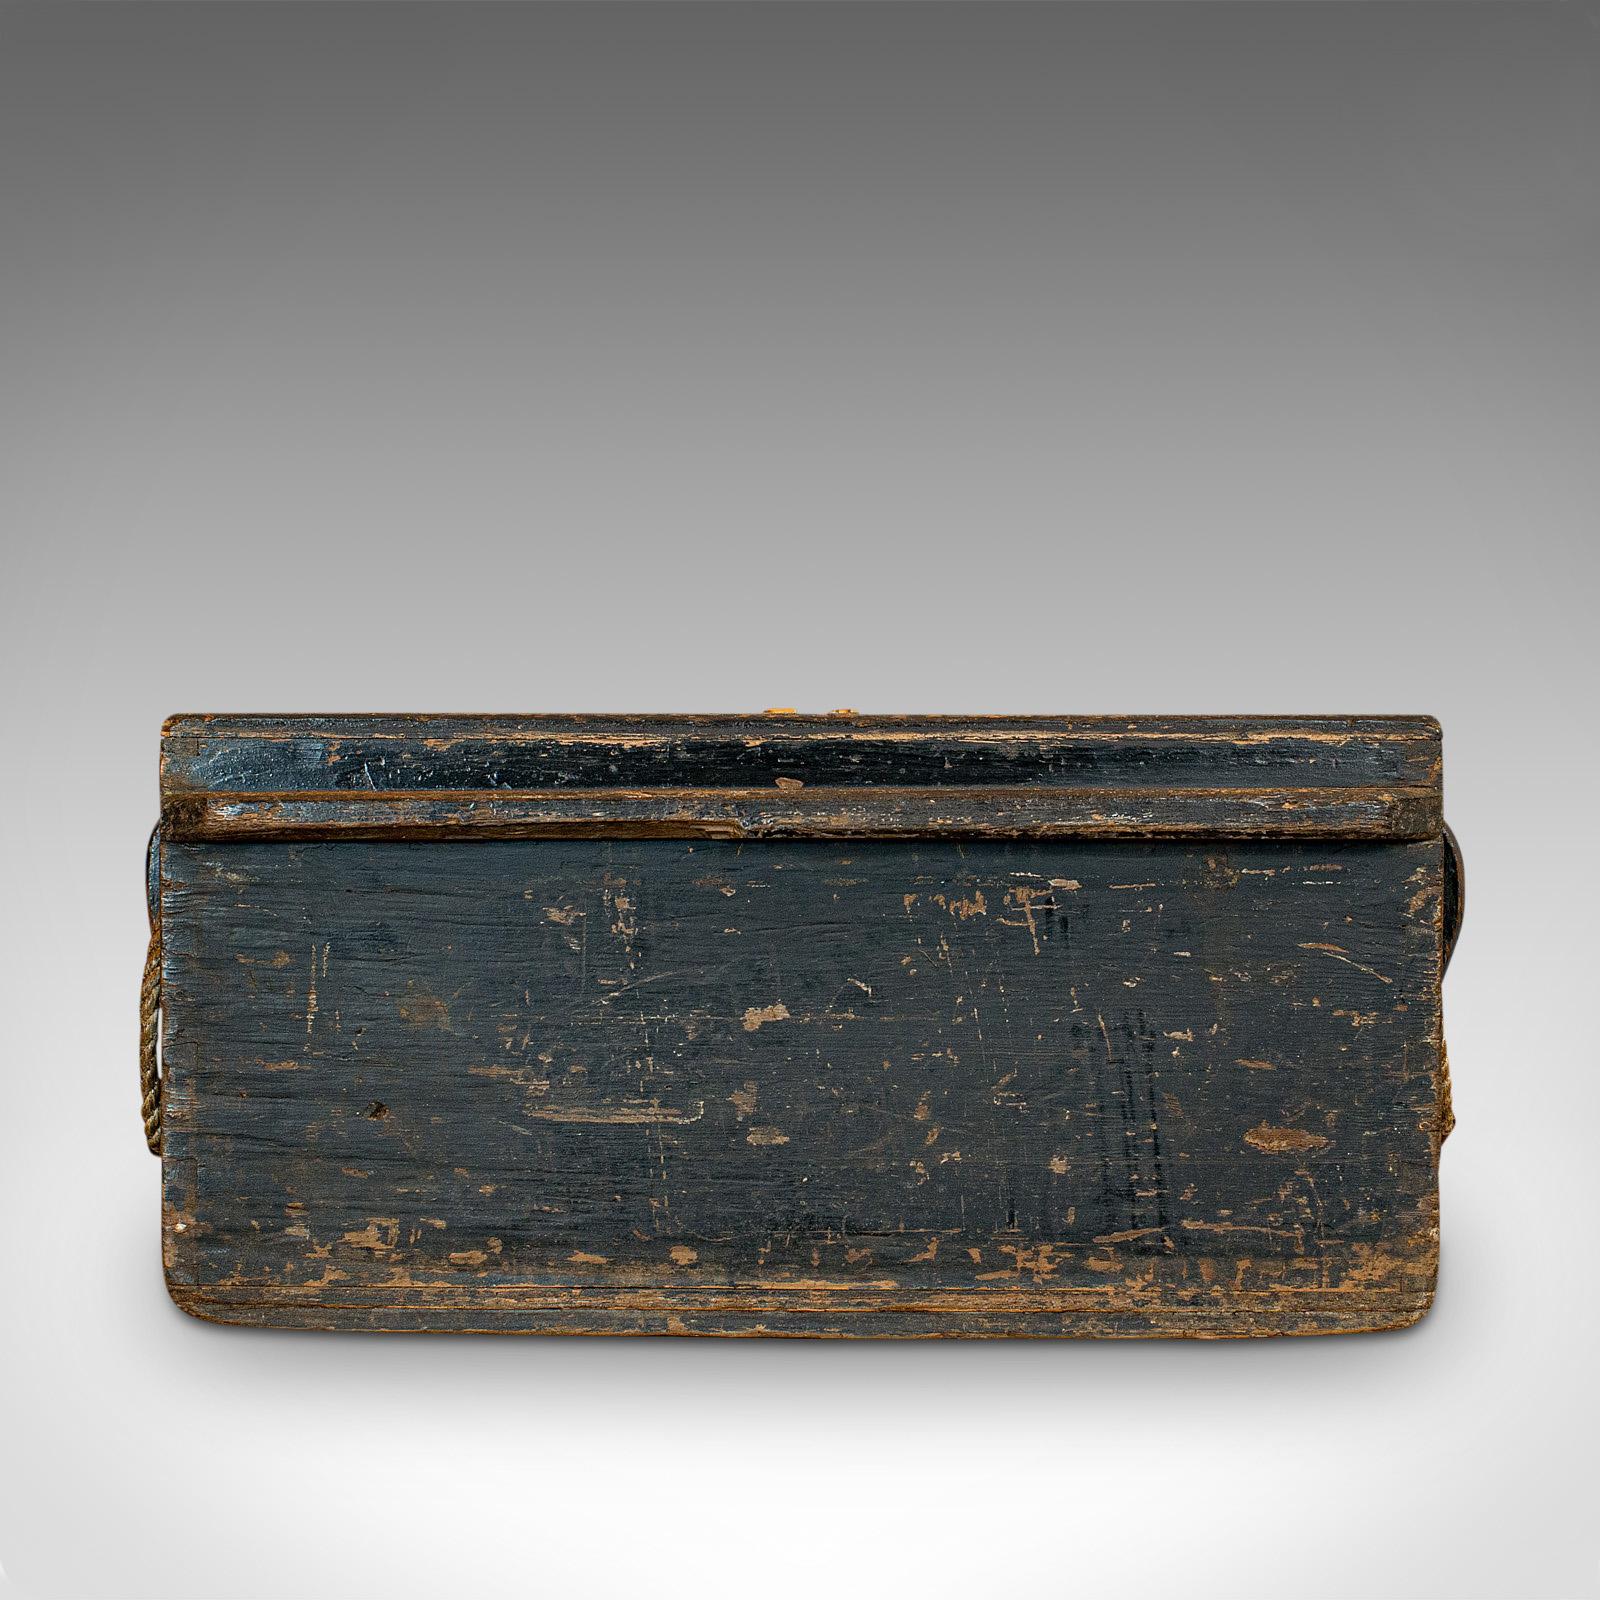 Antique Shipwright's Chest, English, Craftsman's Tool Trunk, Victorian, 1900 1